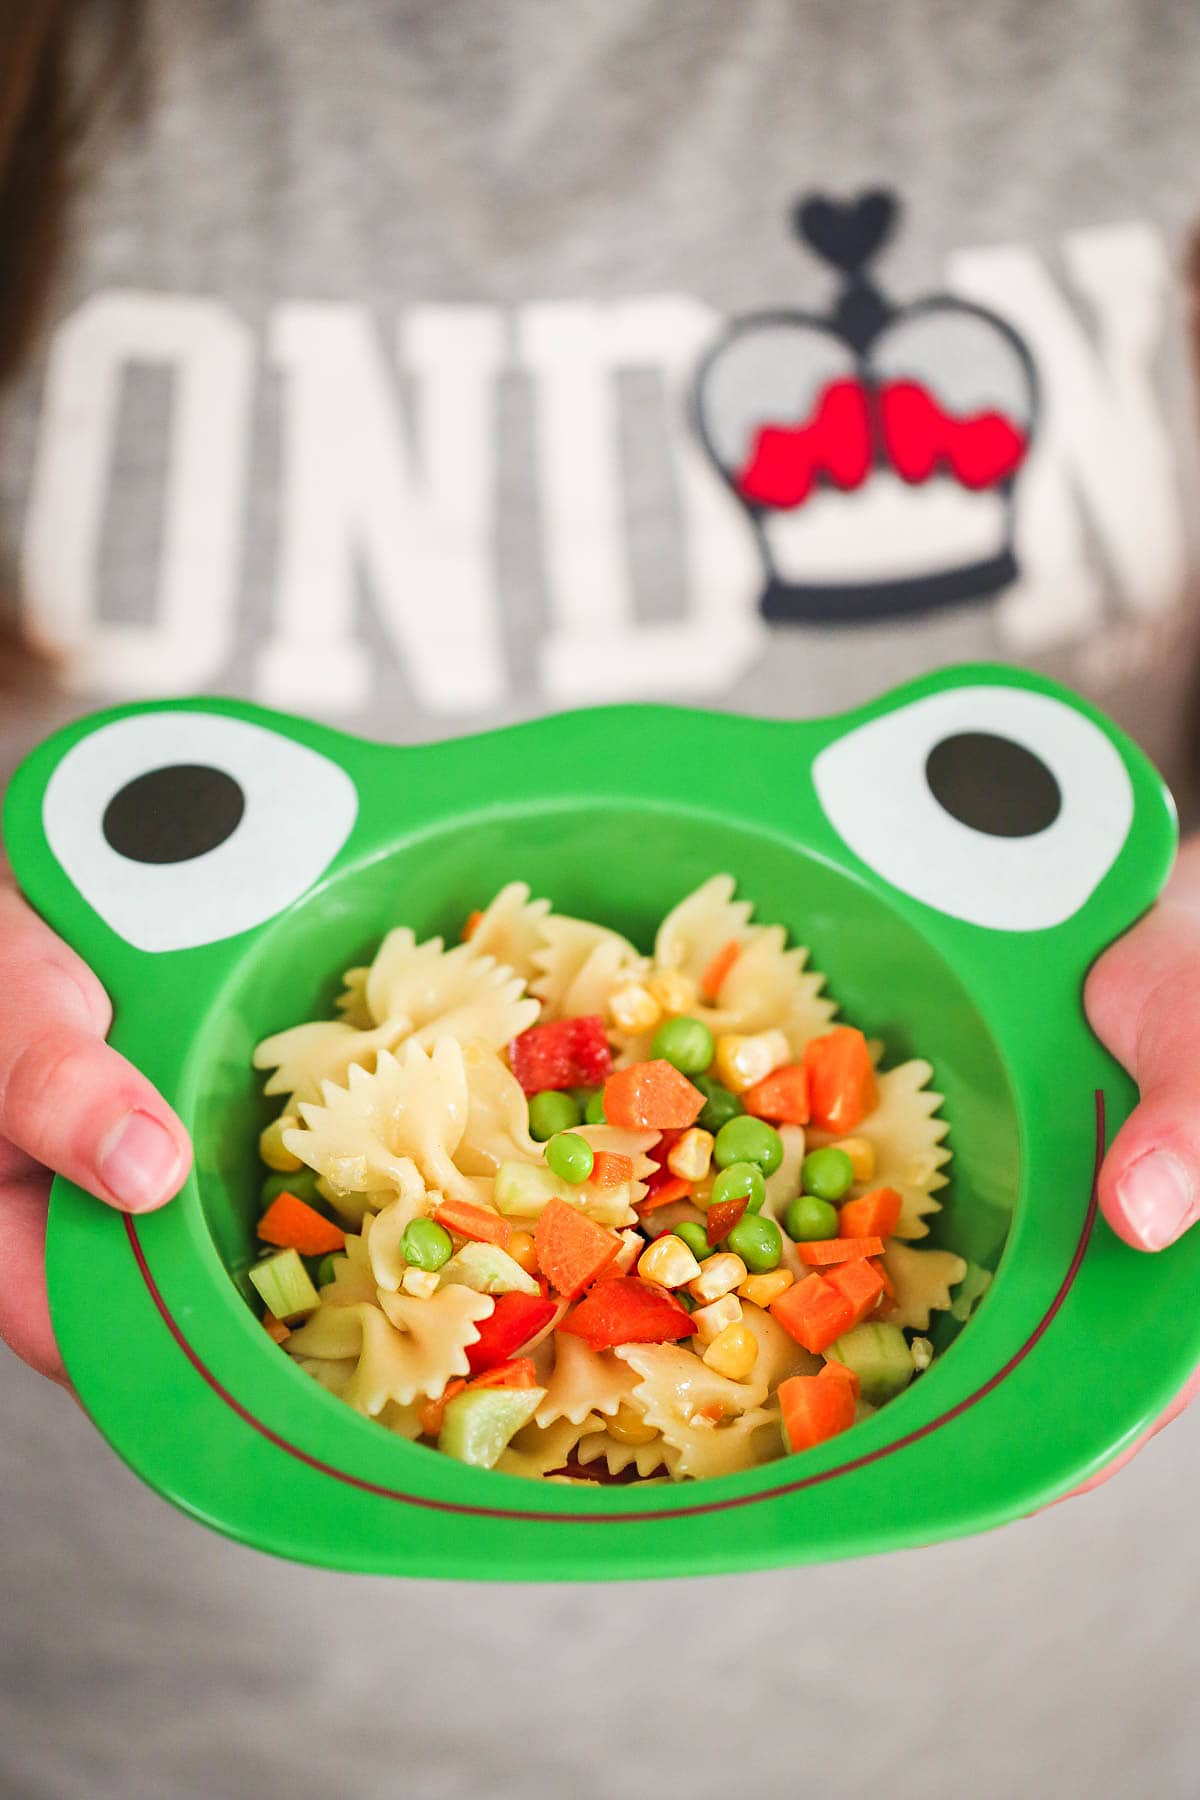 A girl holding a fun frog shaped bowl filled with pasta salad